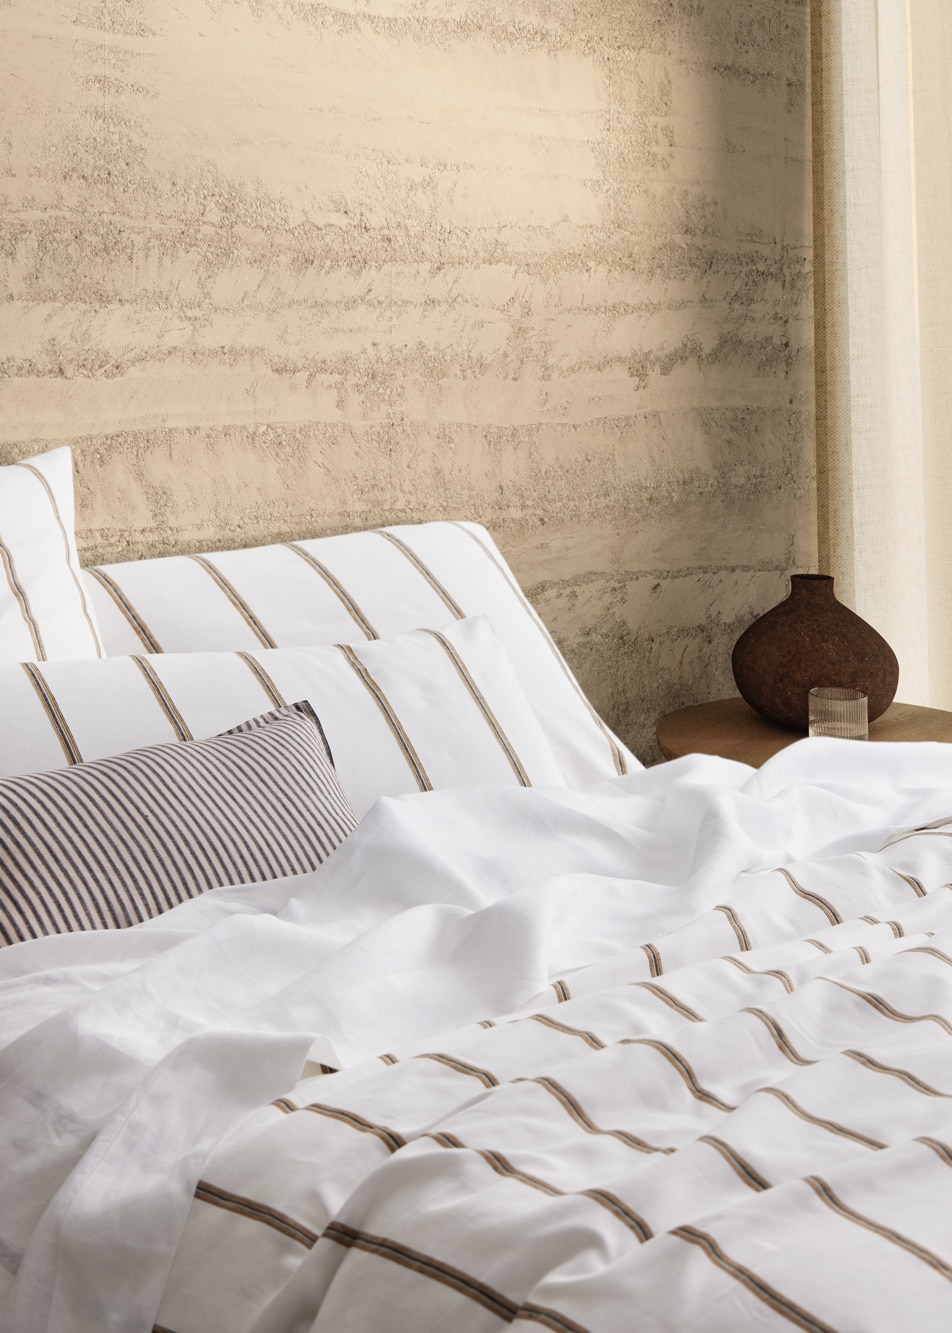 Close up of a white and neutral tone bed in front of a concrete wall. A vase sits on a bedside table.